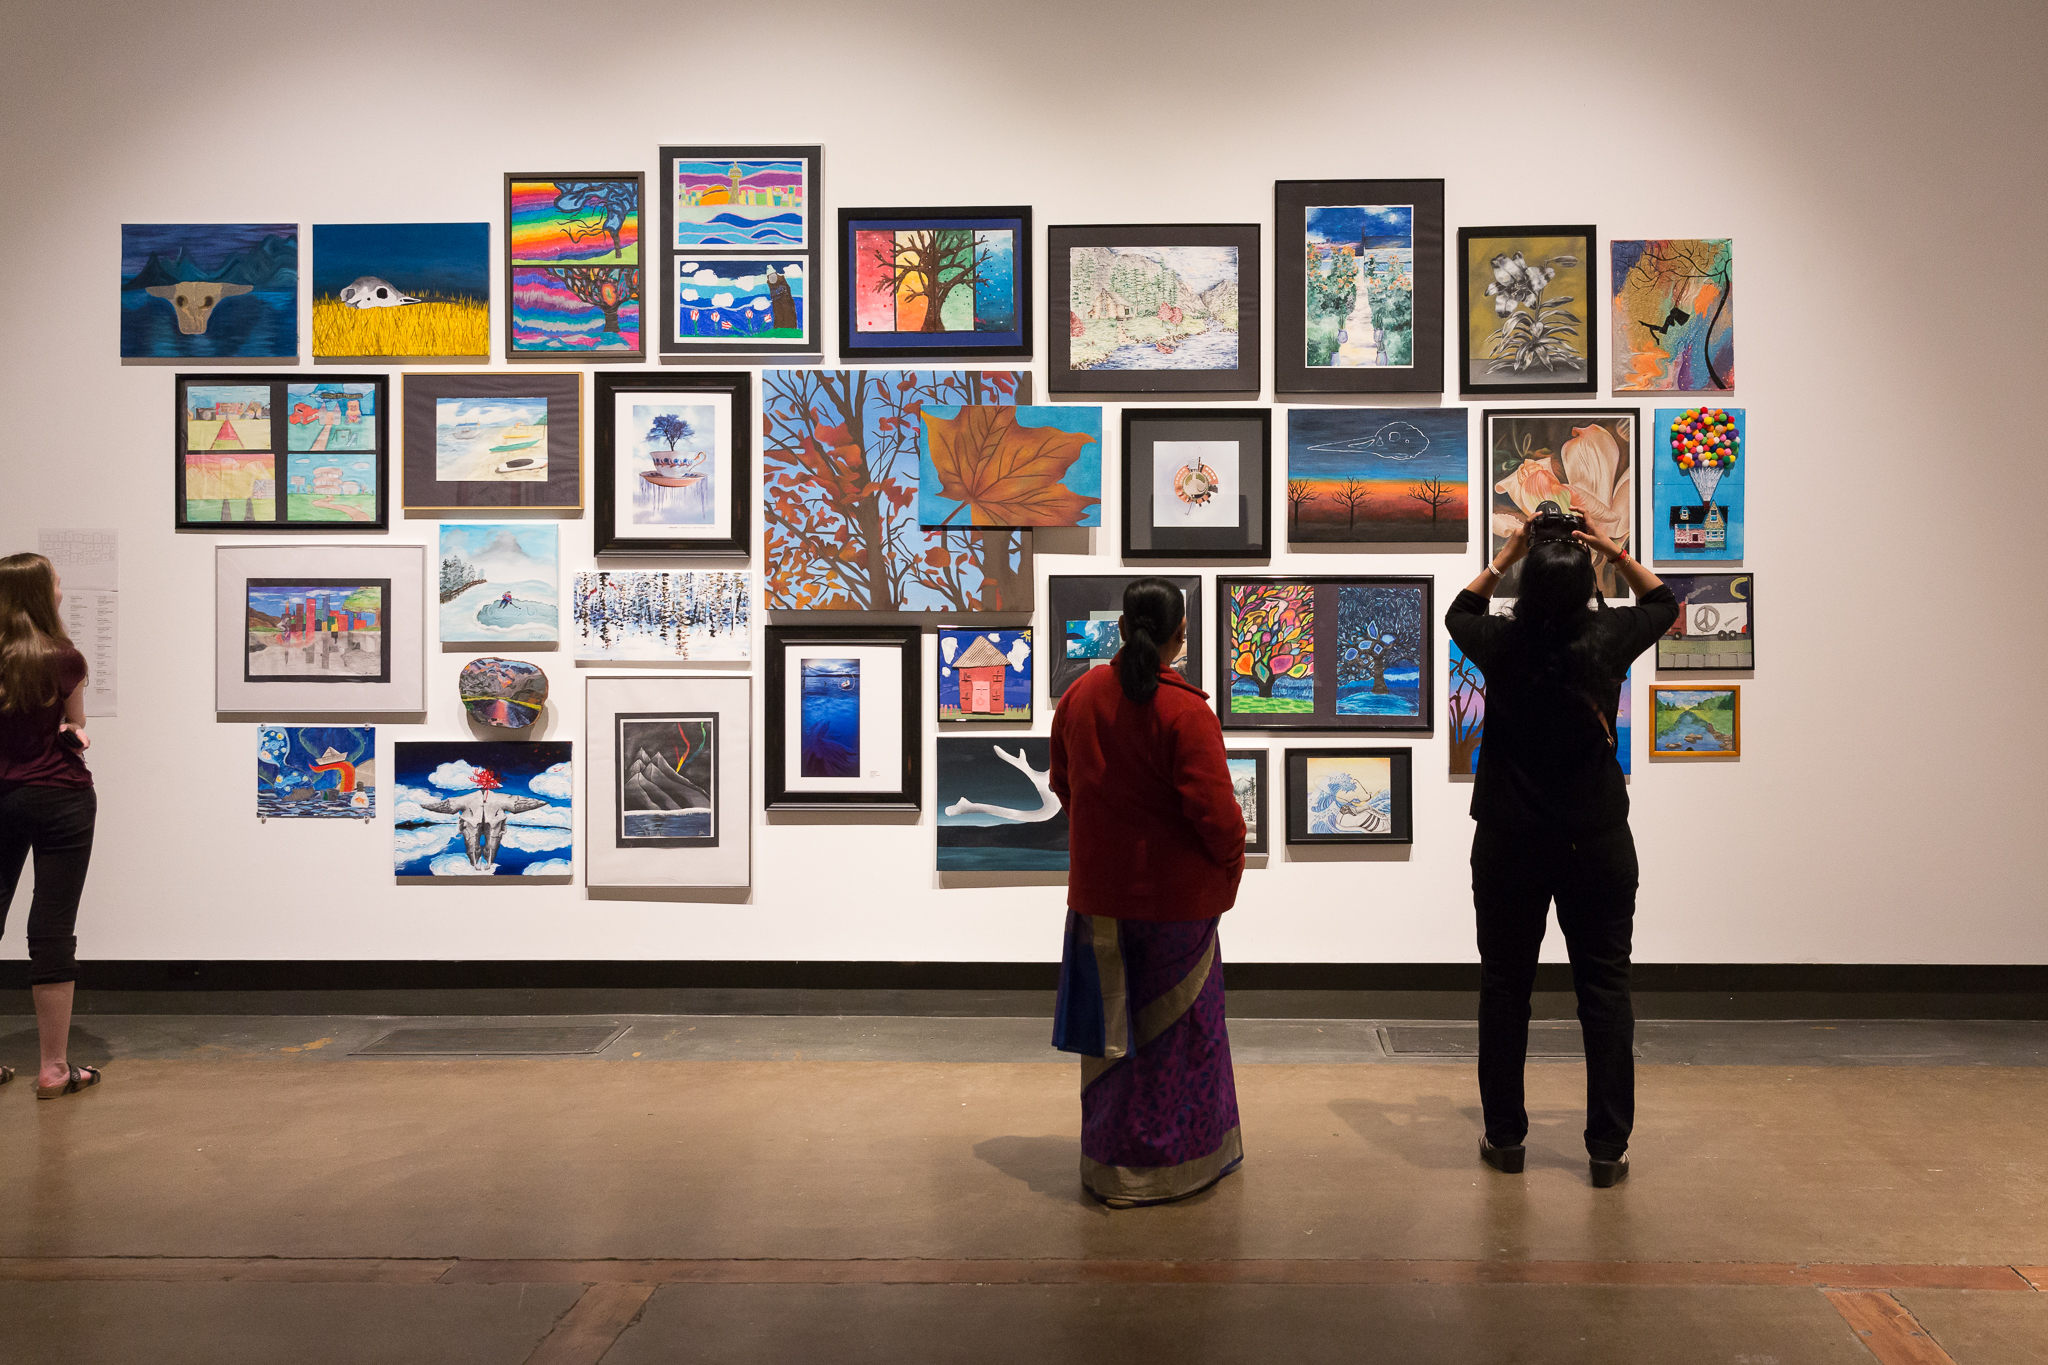 Gallery visitors seen from behind as they look at a gallery wall filled with a large array of framed student paintings and drawings